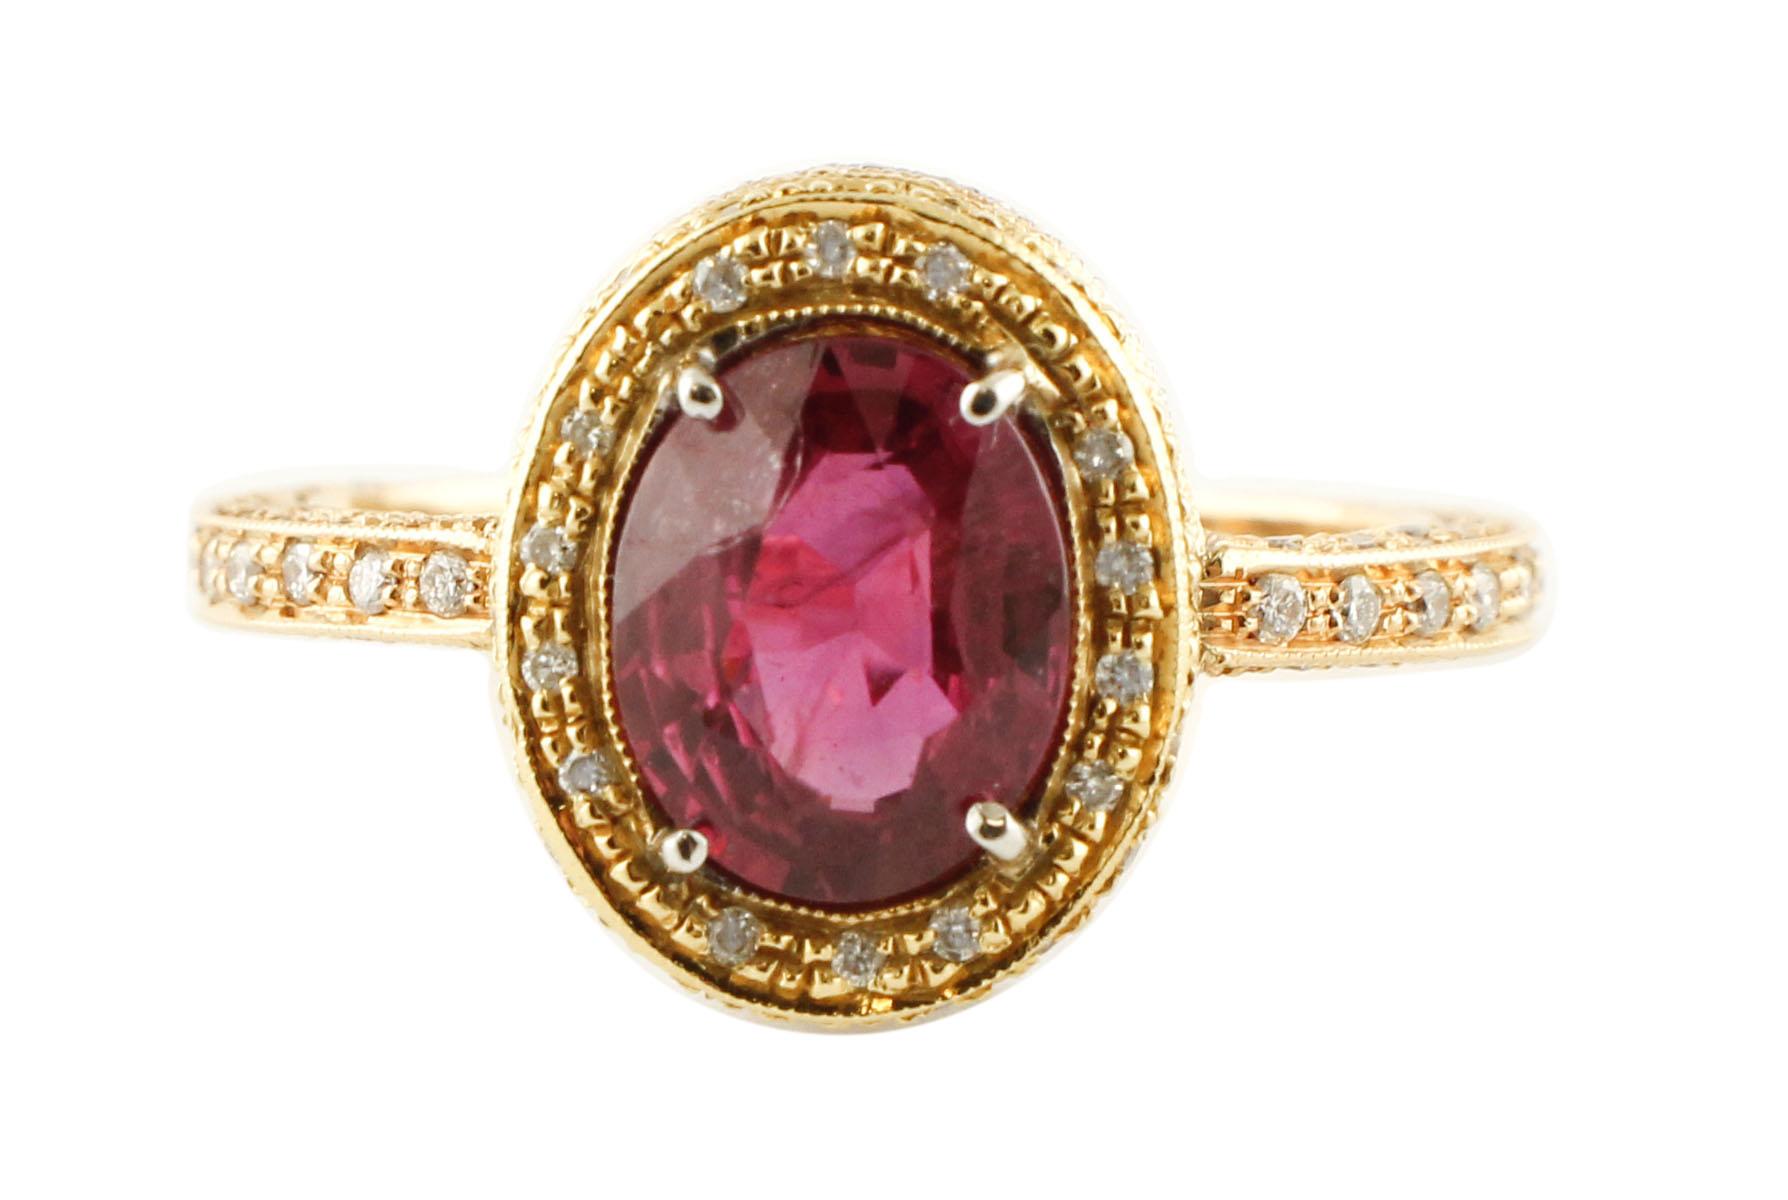 Cluster ring in 18kt yellow, rose and white gold structure, composed of 2.40 ct of a deep color ruby in the center surrounded by diamonds all around and on the two sides
Ruby 2.40 ct     (9 mm X 7 mm)
Diamonds 0.70 ct 
Total Weight 6.70 g
R.F